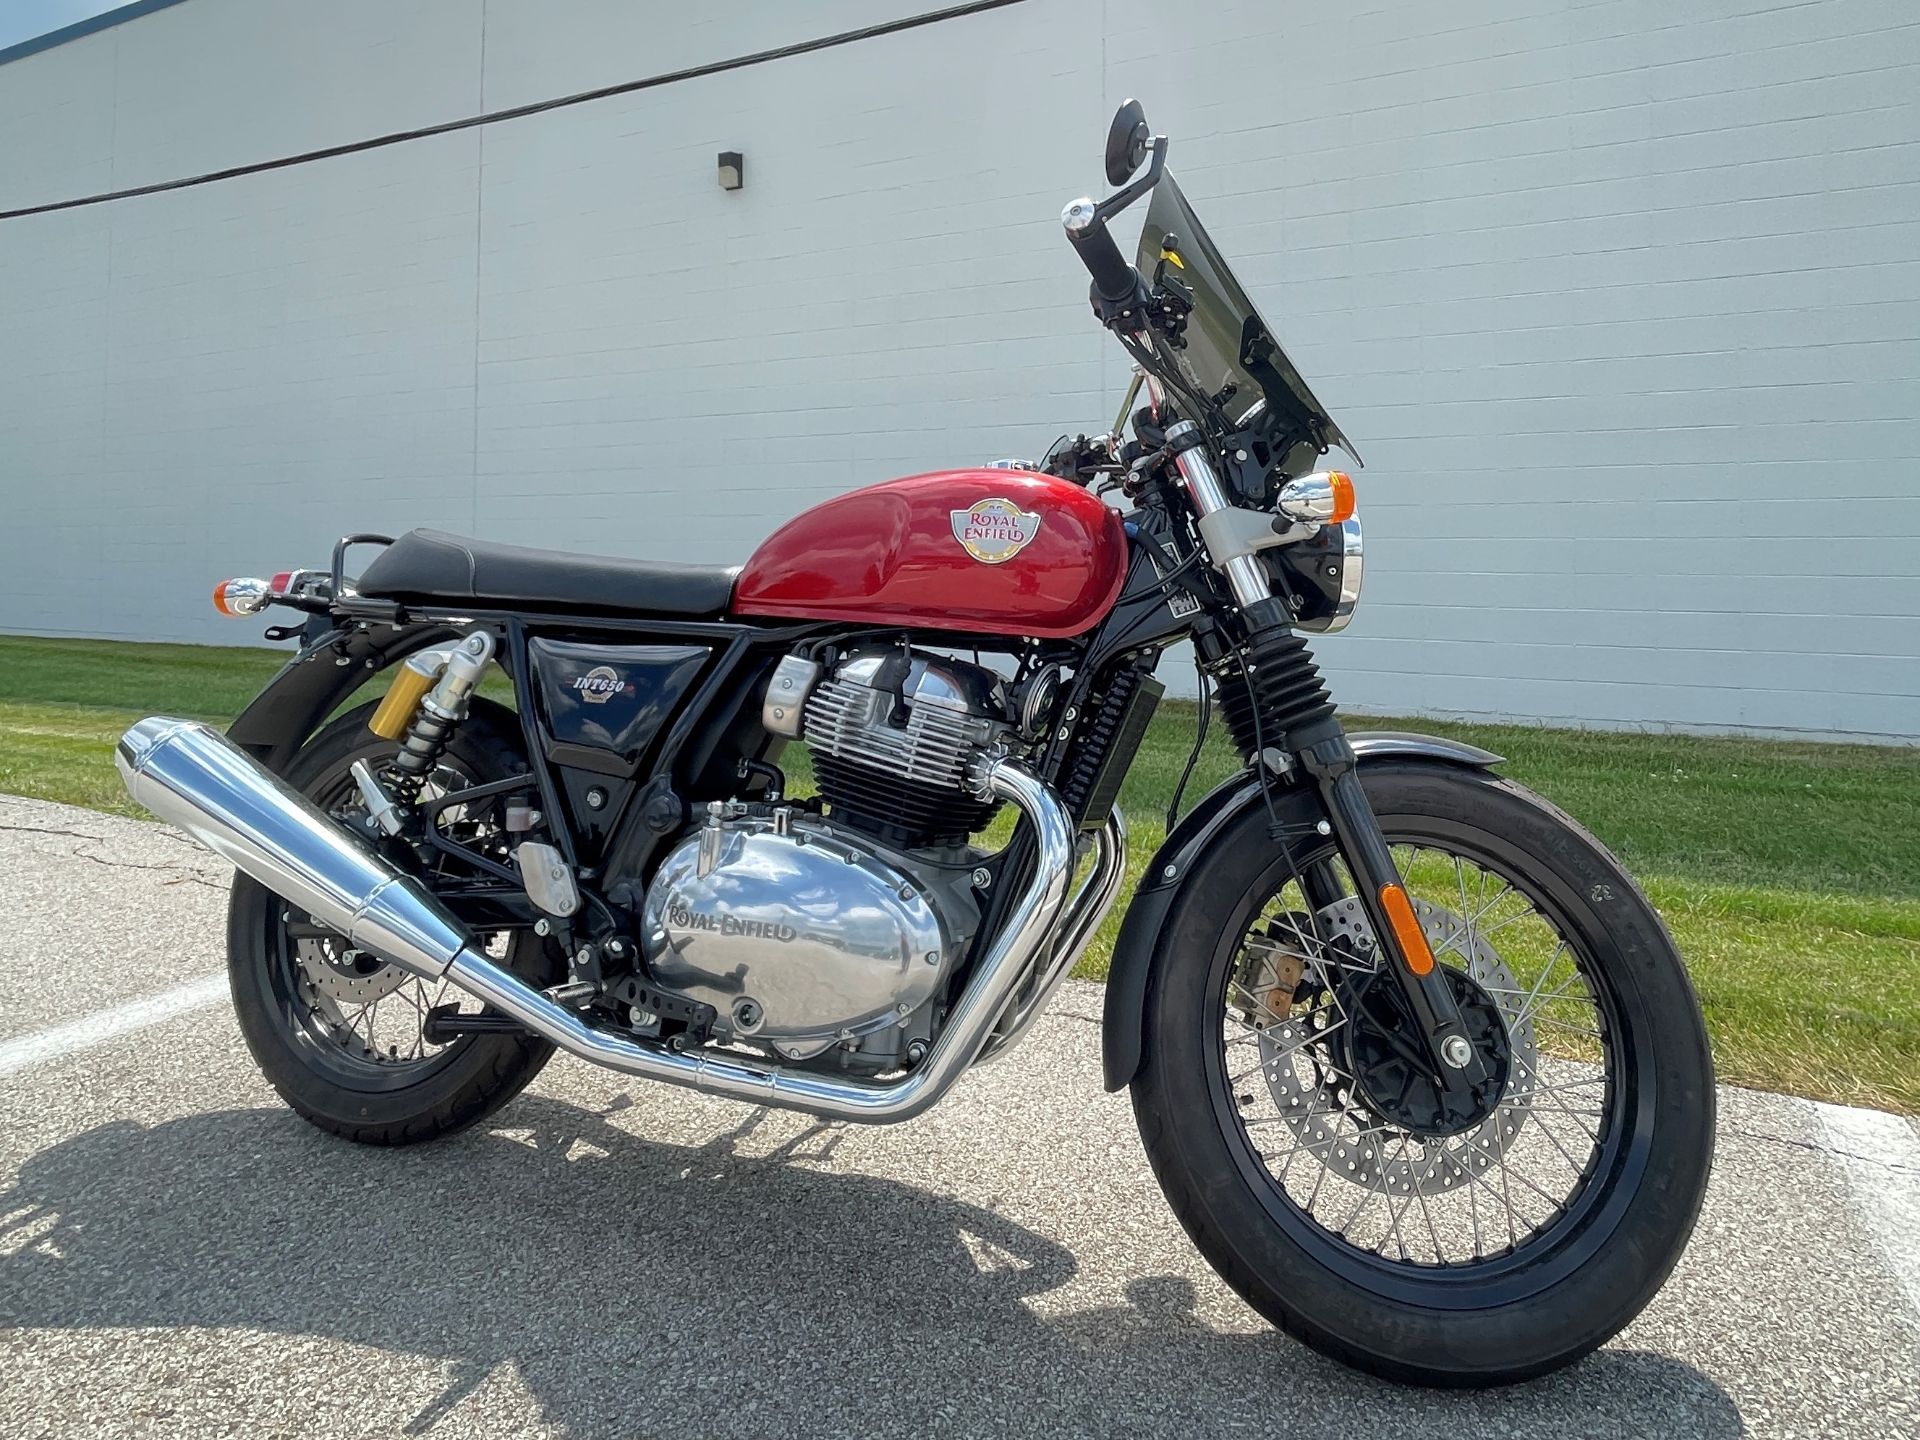 2022 Royal Enfield INT650 in Fort Wayne, Indiana - Photo 3